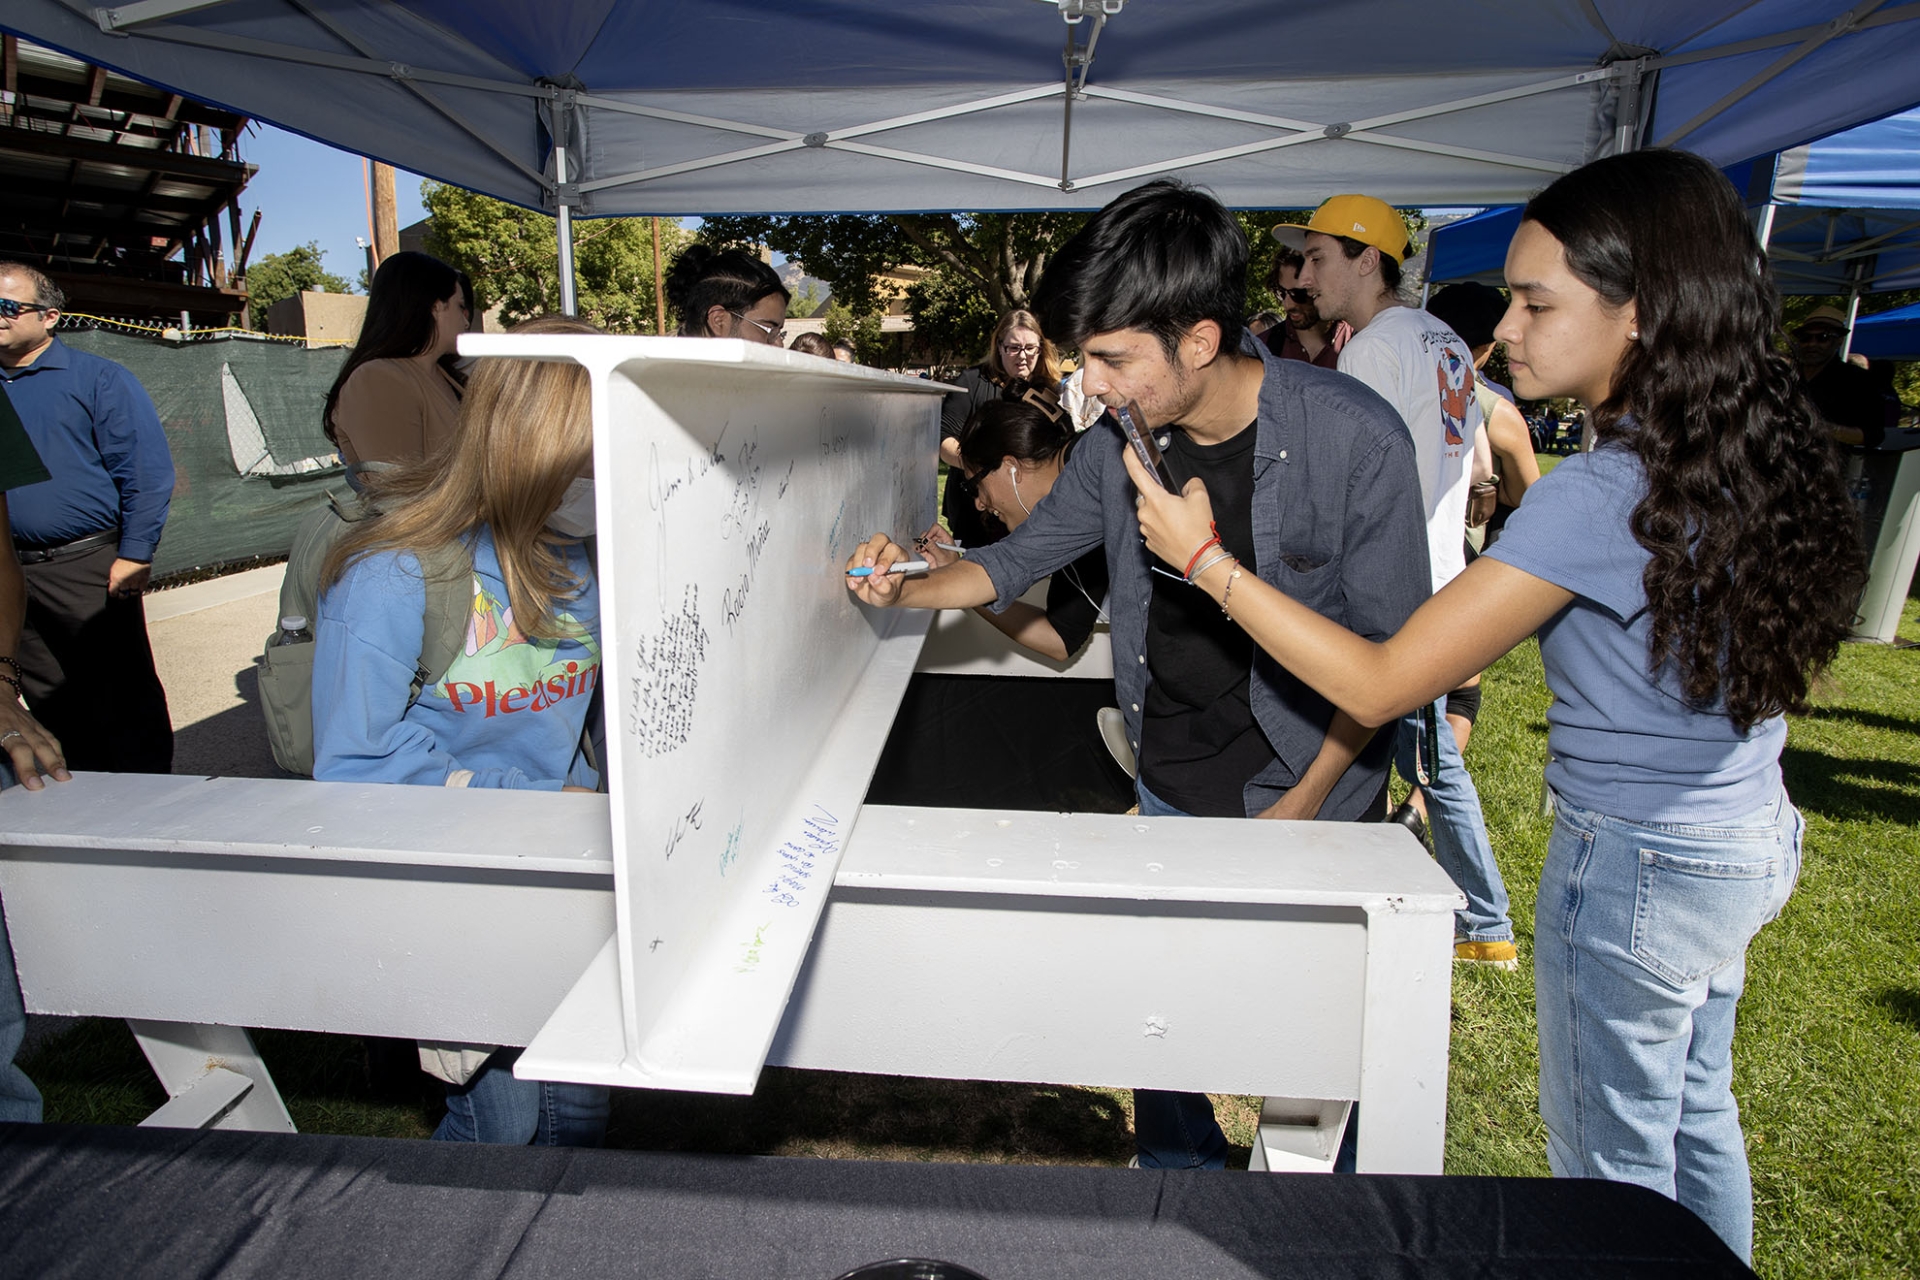 The campus community was invited to sign the beam.